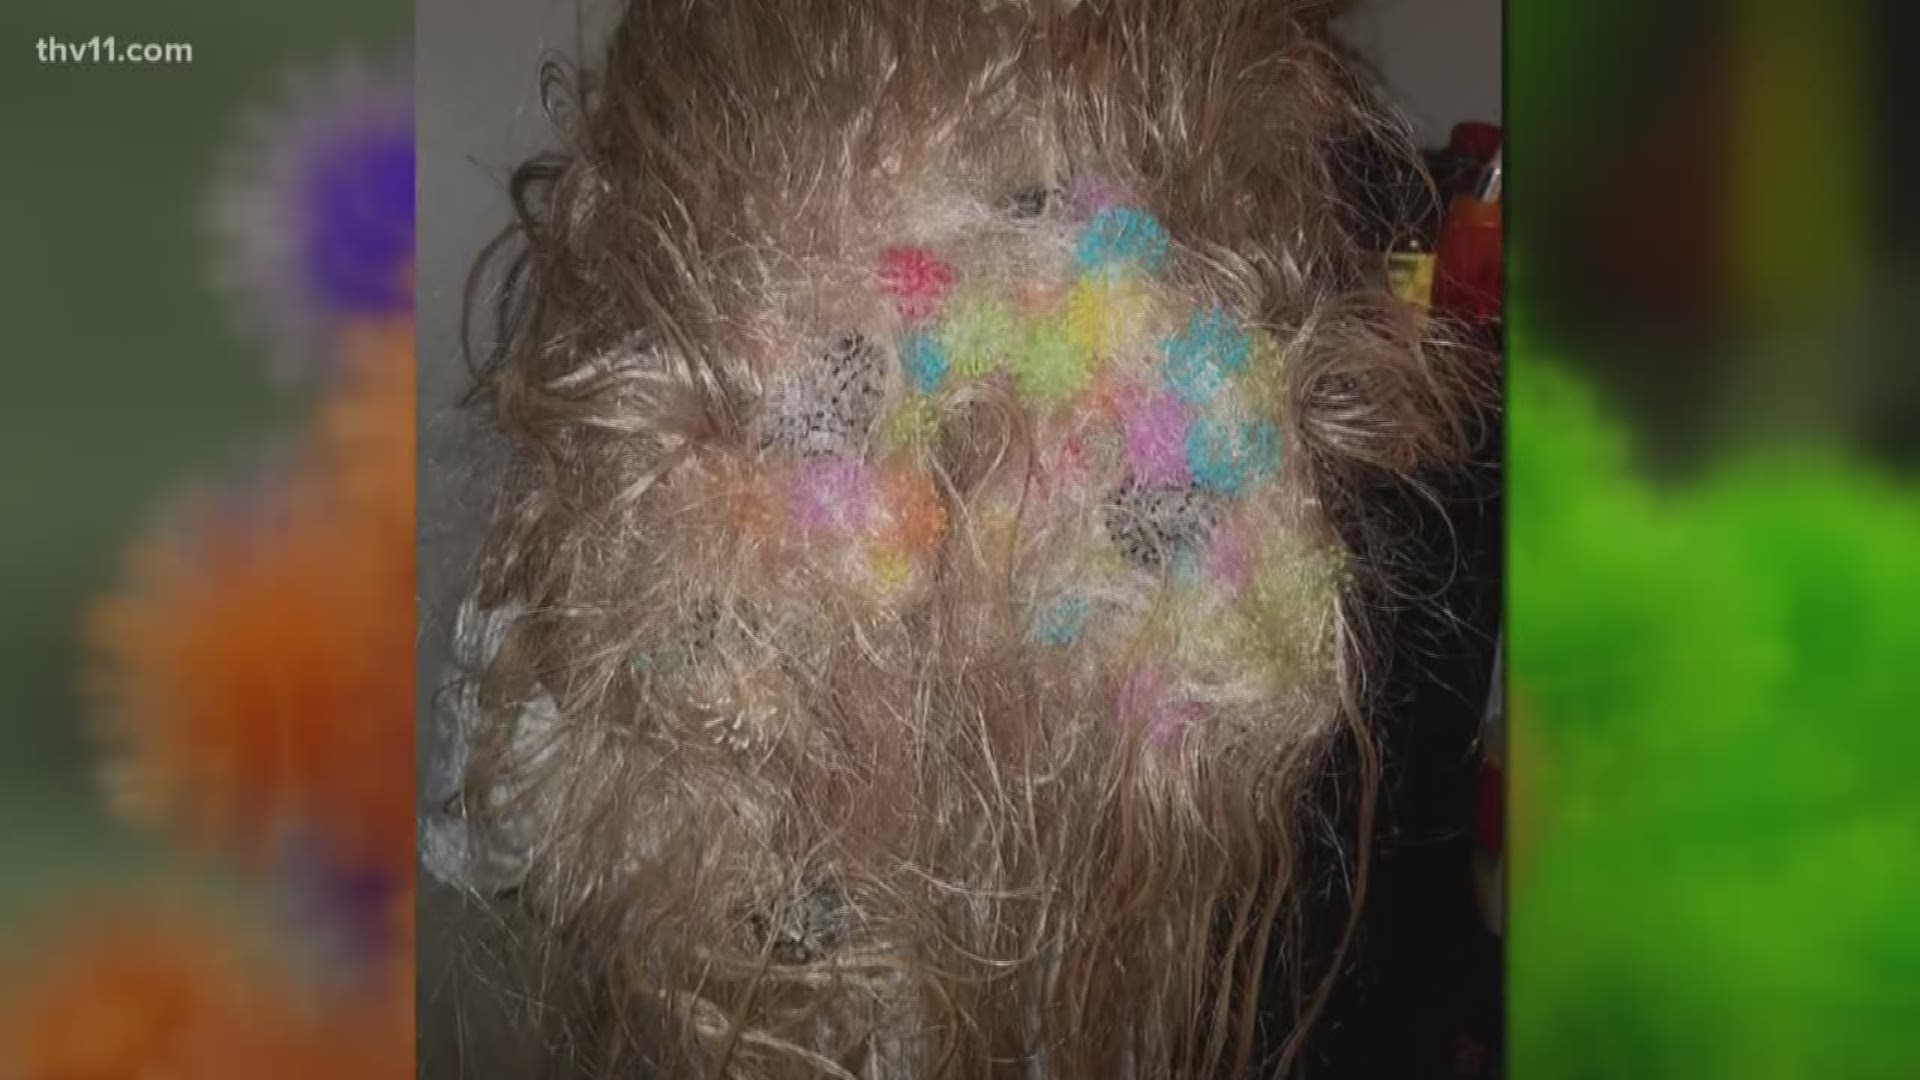 Mom slams Bunchems sticky toys after 150 get stuck in daughter's hair